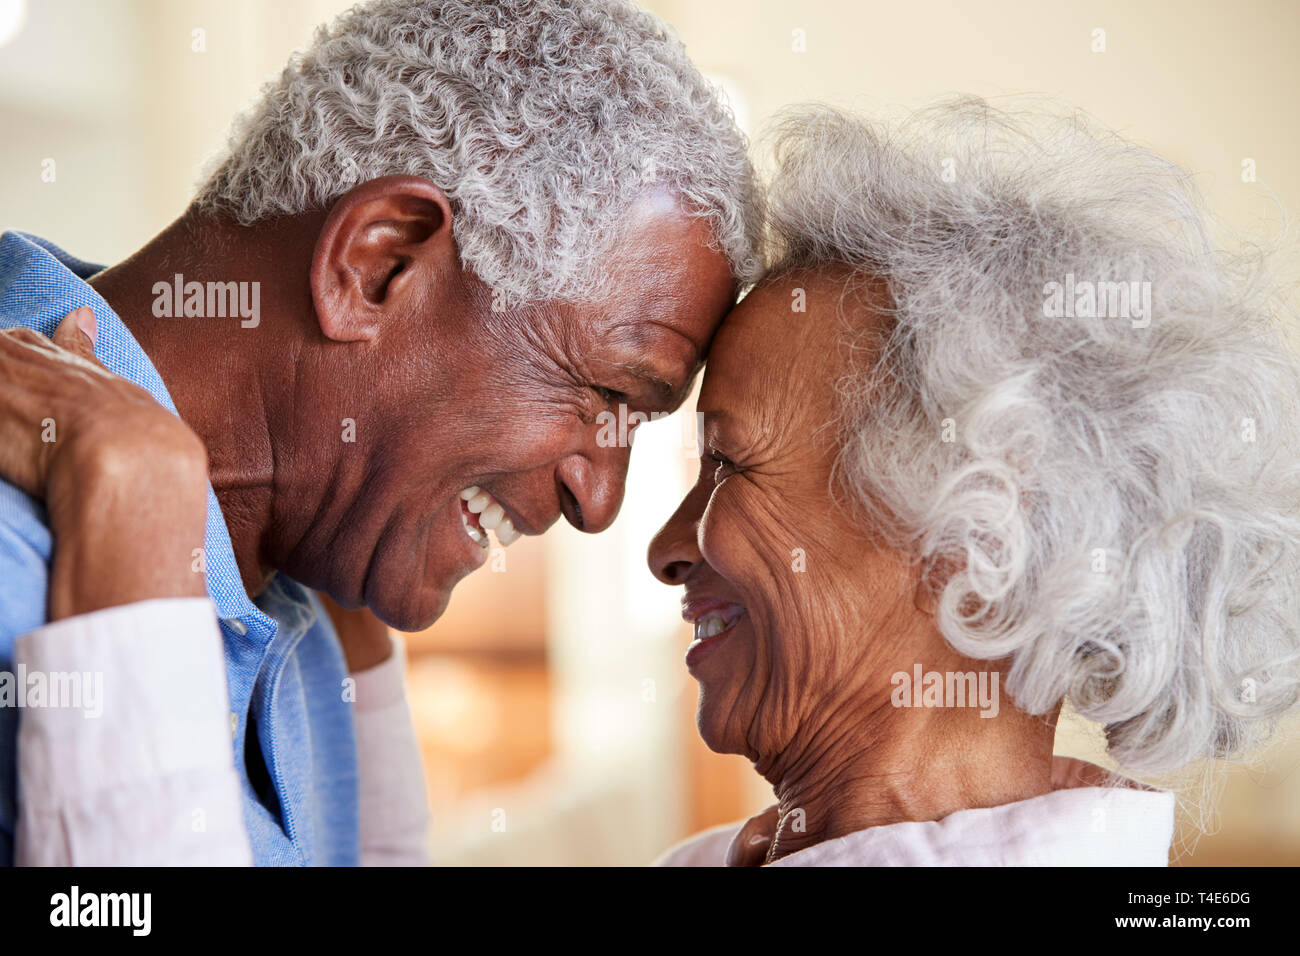 Profile Shot Loving Senior Couple Head To Head At Home Together Stock Photo